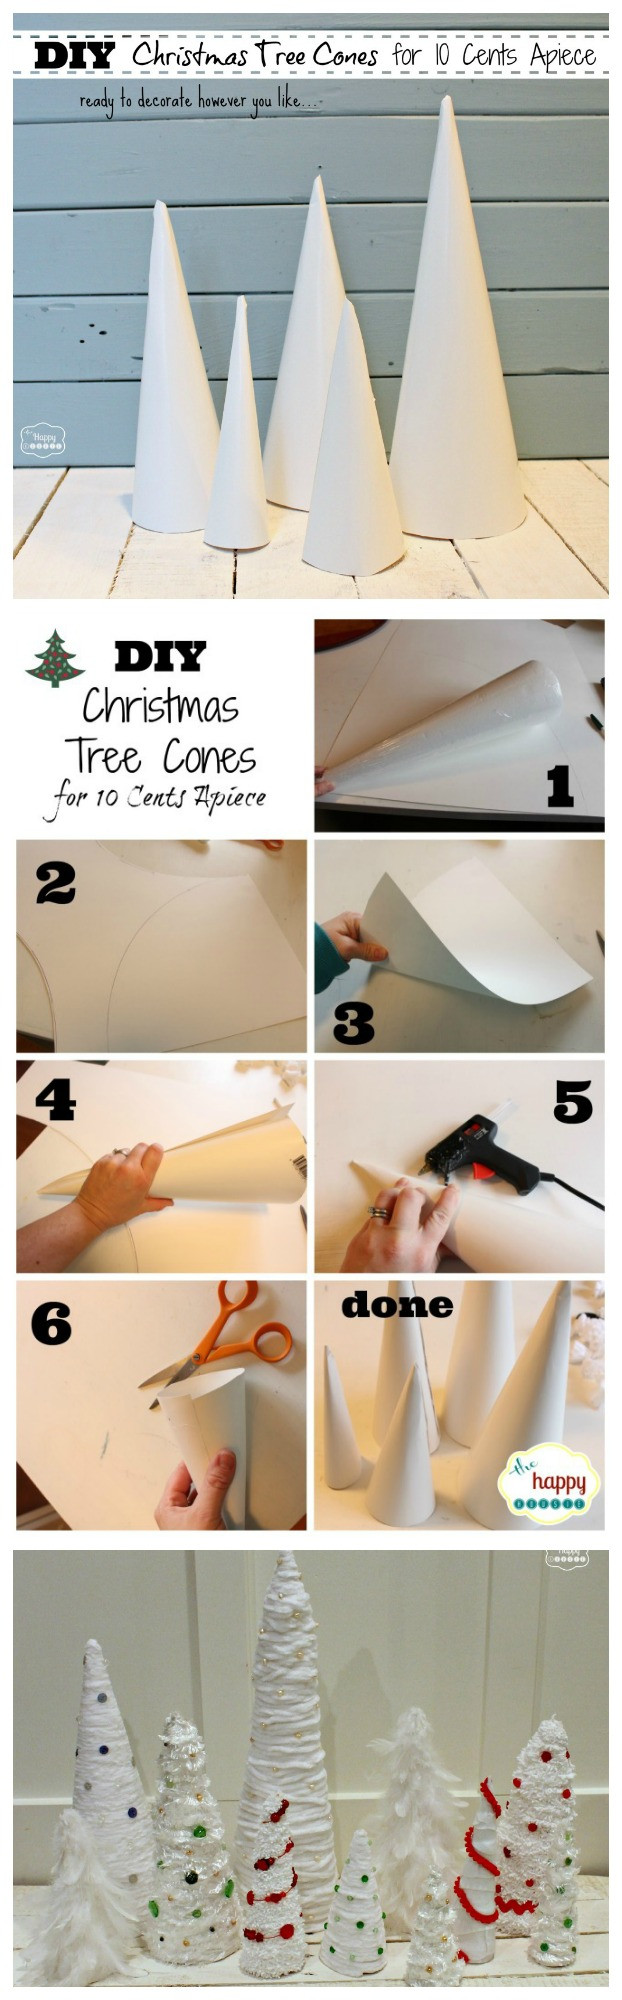 DIY Christmas Tree Cone
 How to Make Christmas Tree Cone Craft Forms for 10 Cents